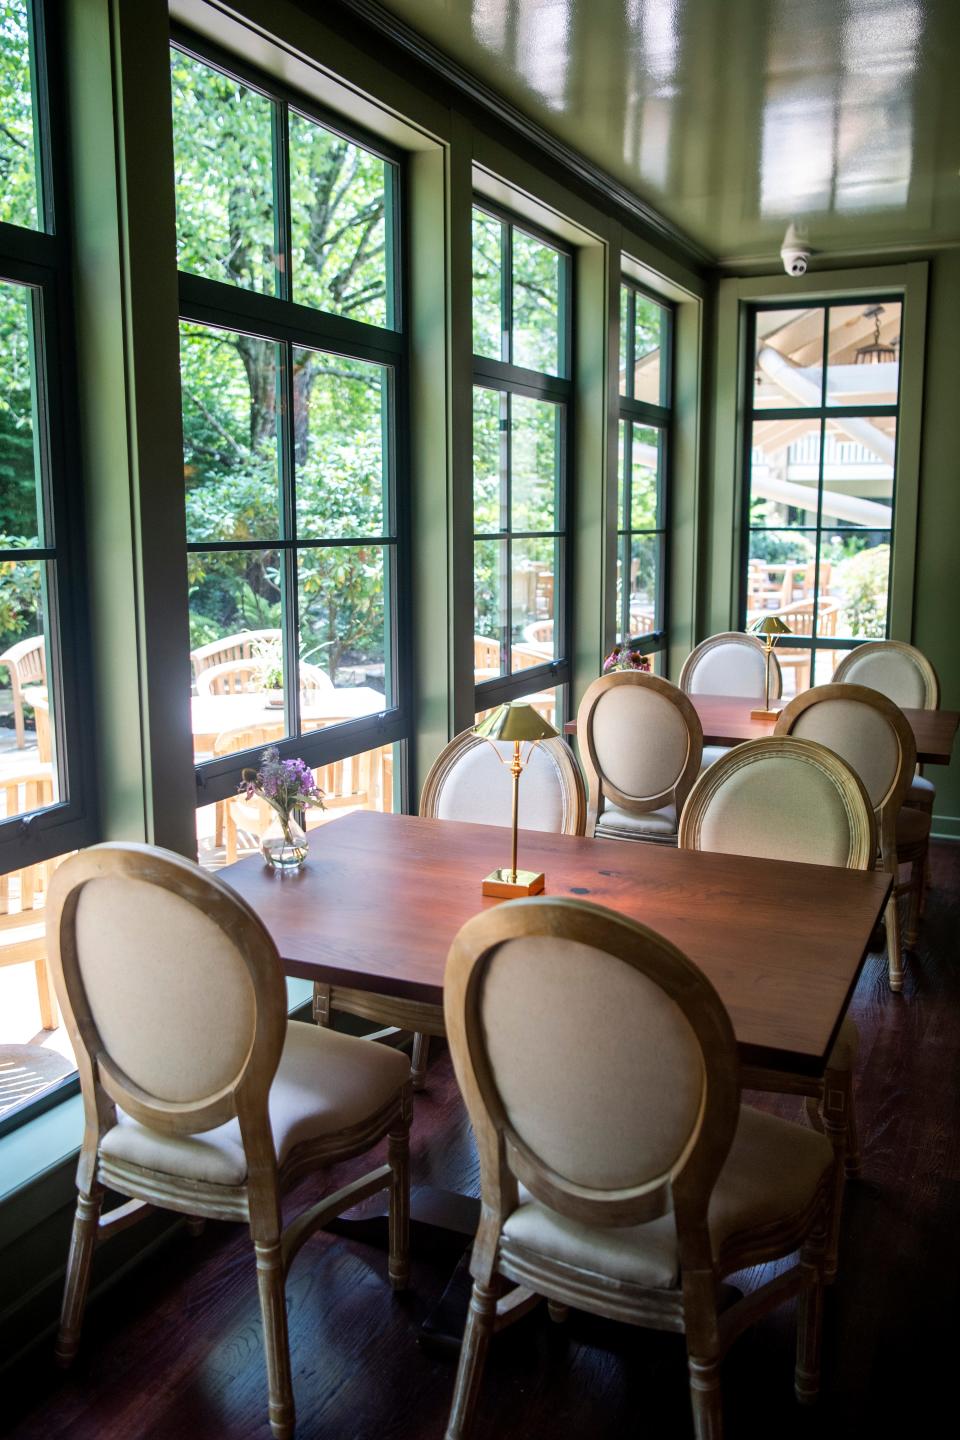 Window-side tables overlook a patio area at the Morningside Room bar at RT Lodge in Maryville on Thursday, July 21, 2022. The lodge, originally built as a private residence Susan Walker, has served as a presidential residence, a restaurant retreat and a hotel over the years.